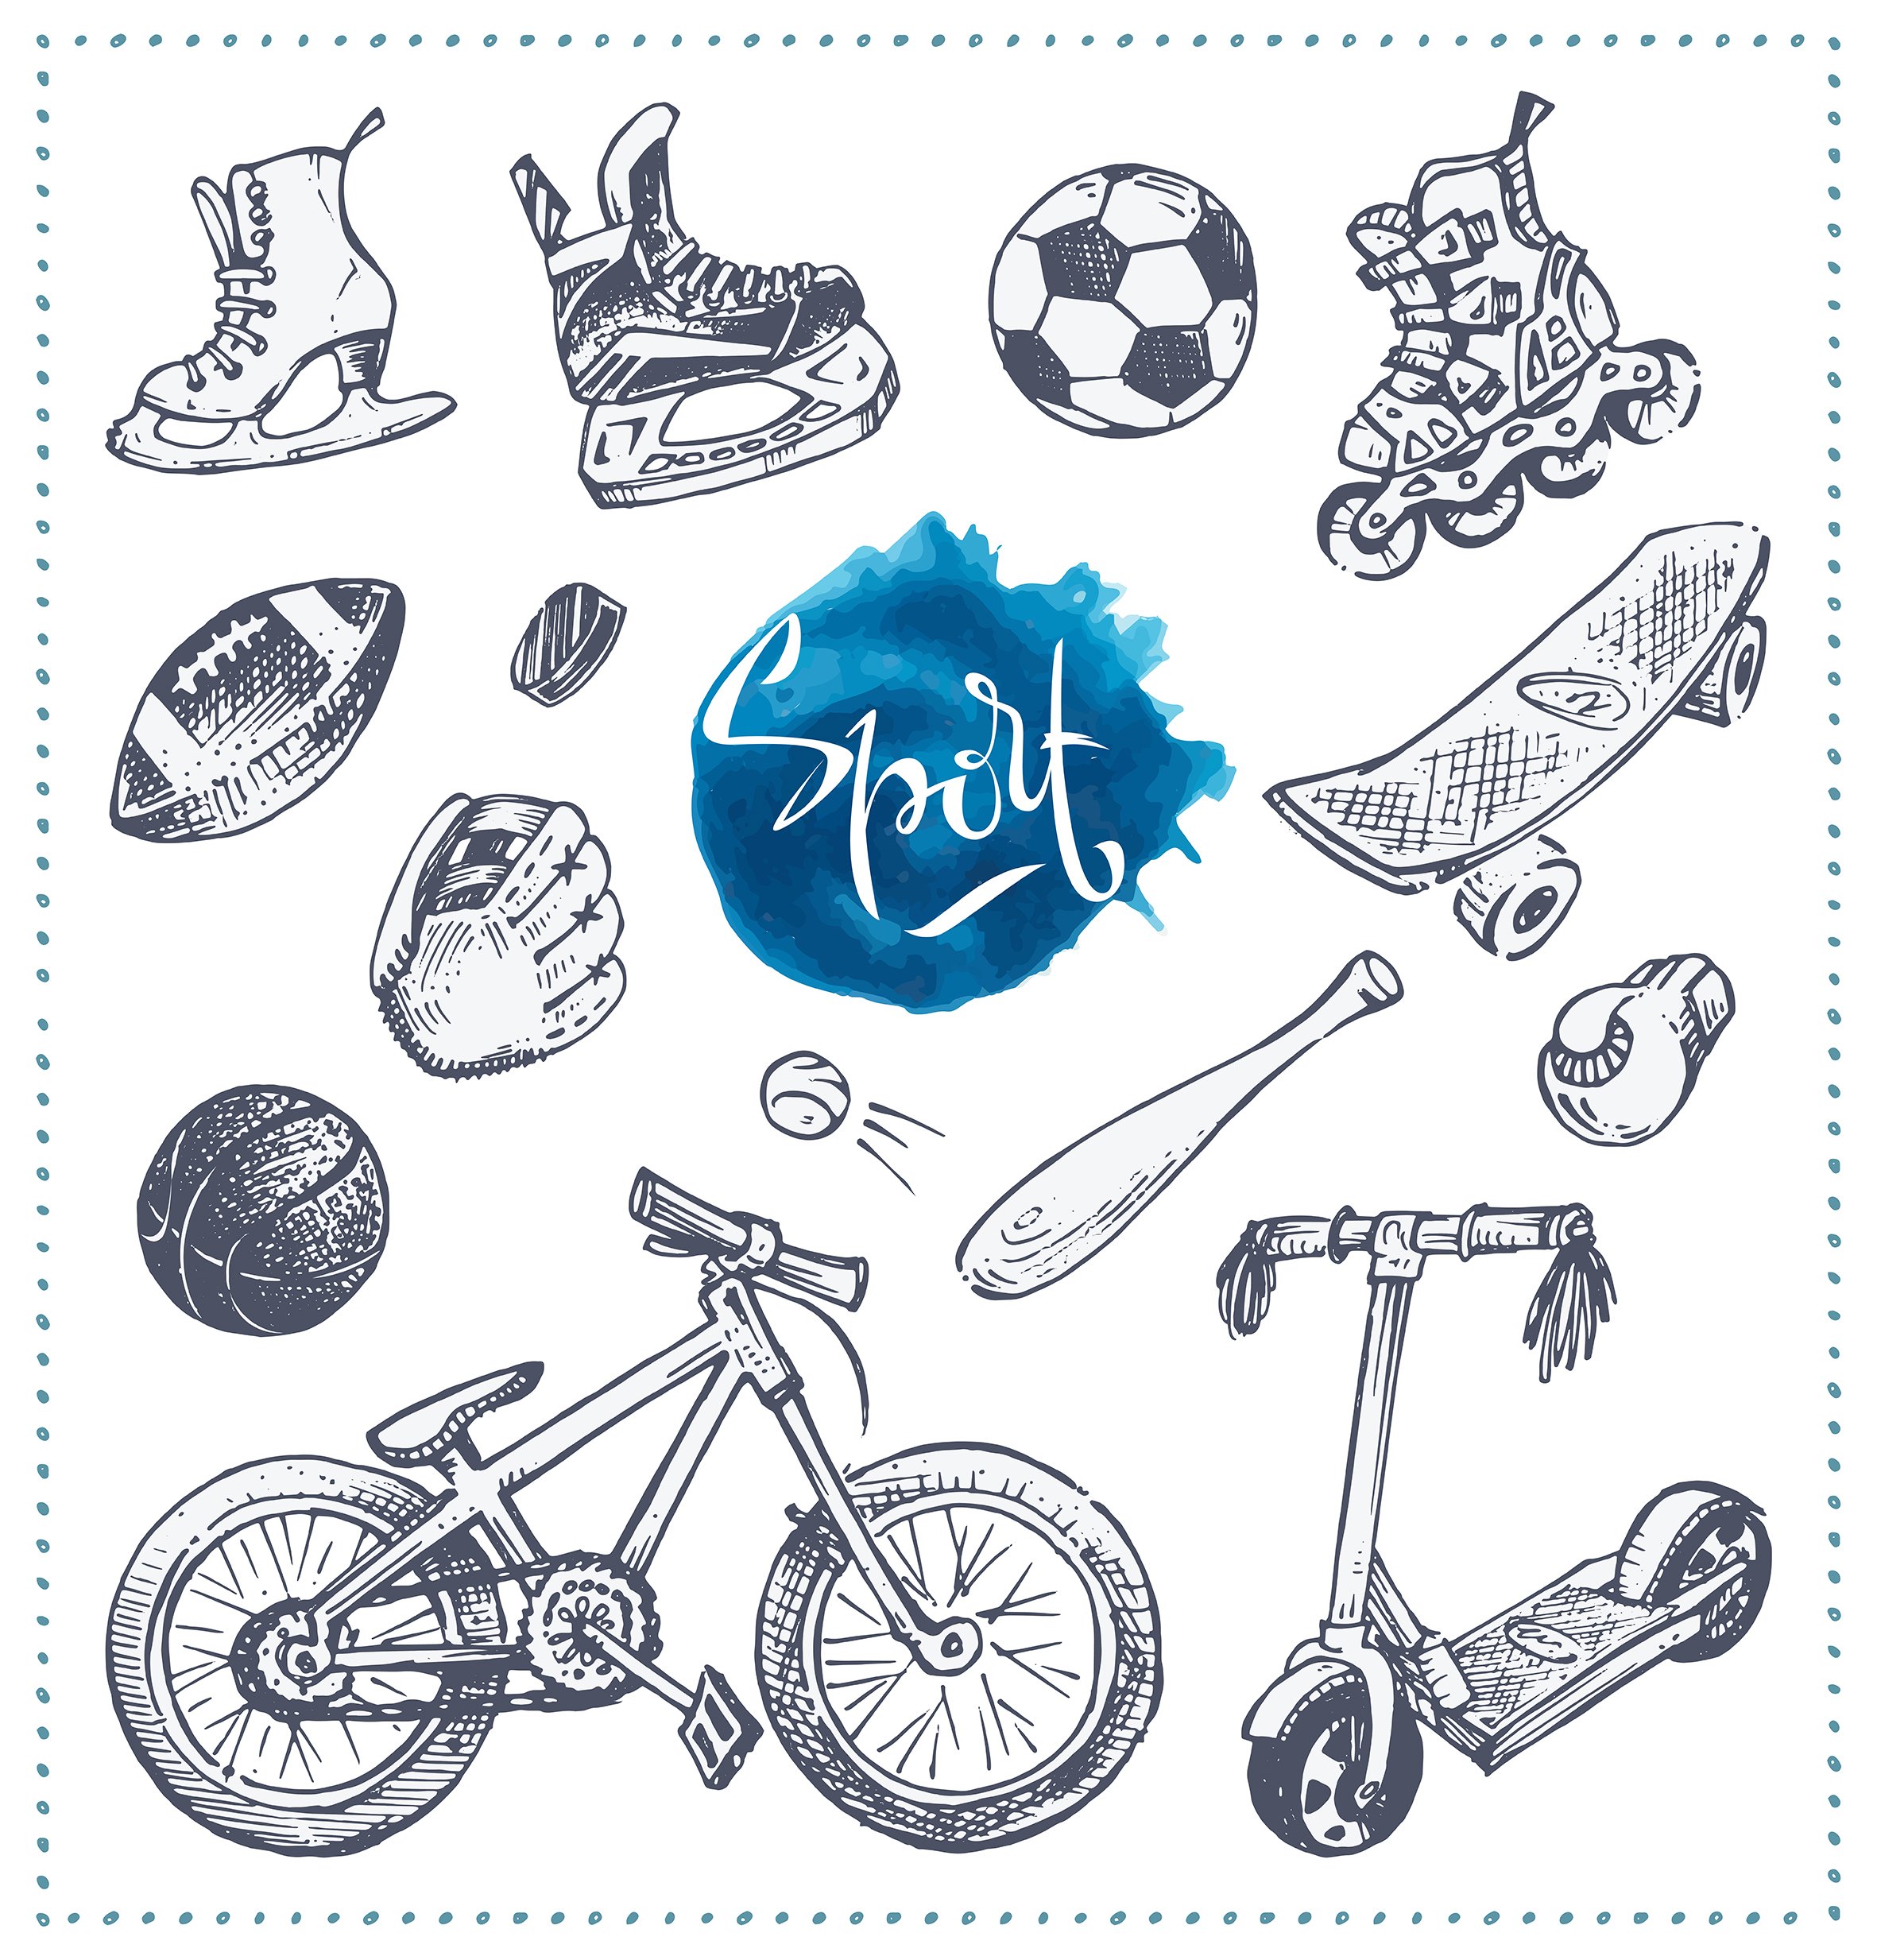 calligraphy sport. sketch icons of school sports equipment bicycle roller skates scooters baseball balls. isolated vector for packaging design and web stores 123